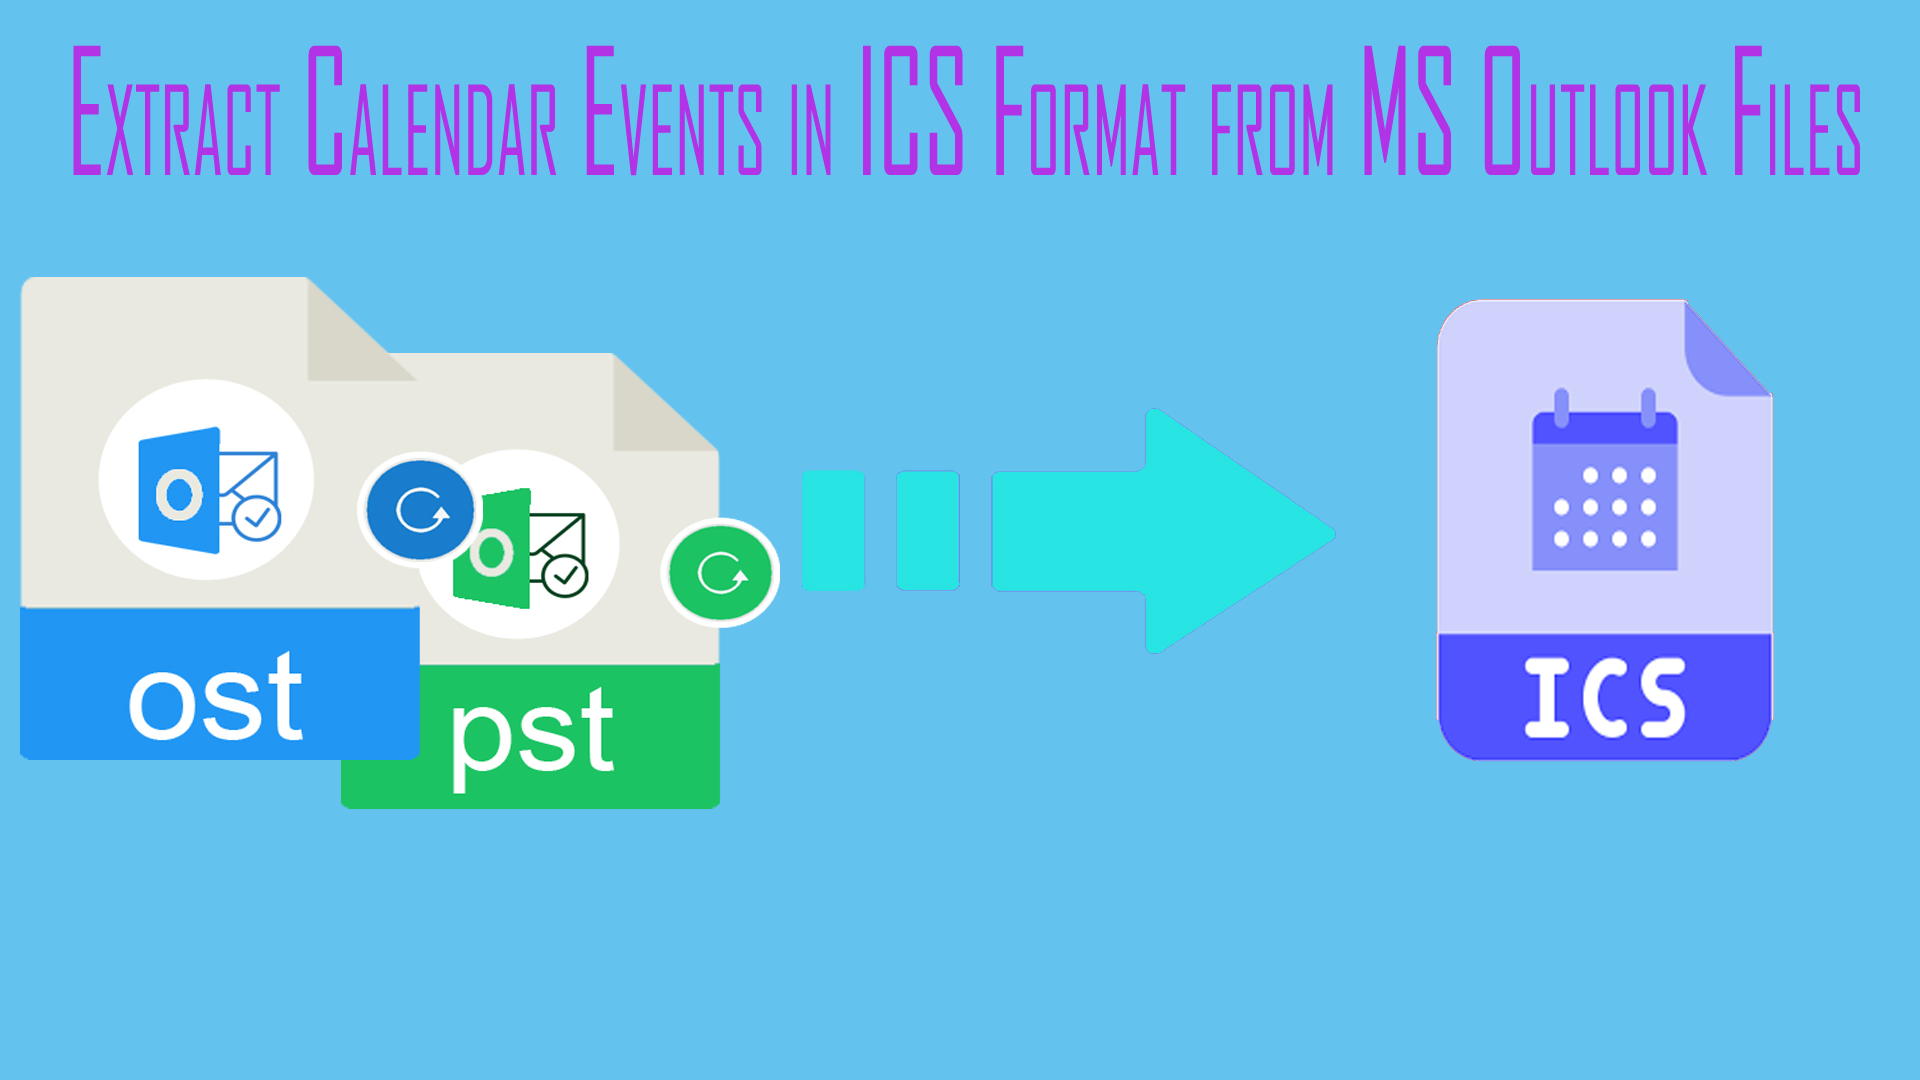 A Comprehensive Guide for Extracting Calendars Events in ICS Format from MS Outlook Files